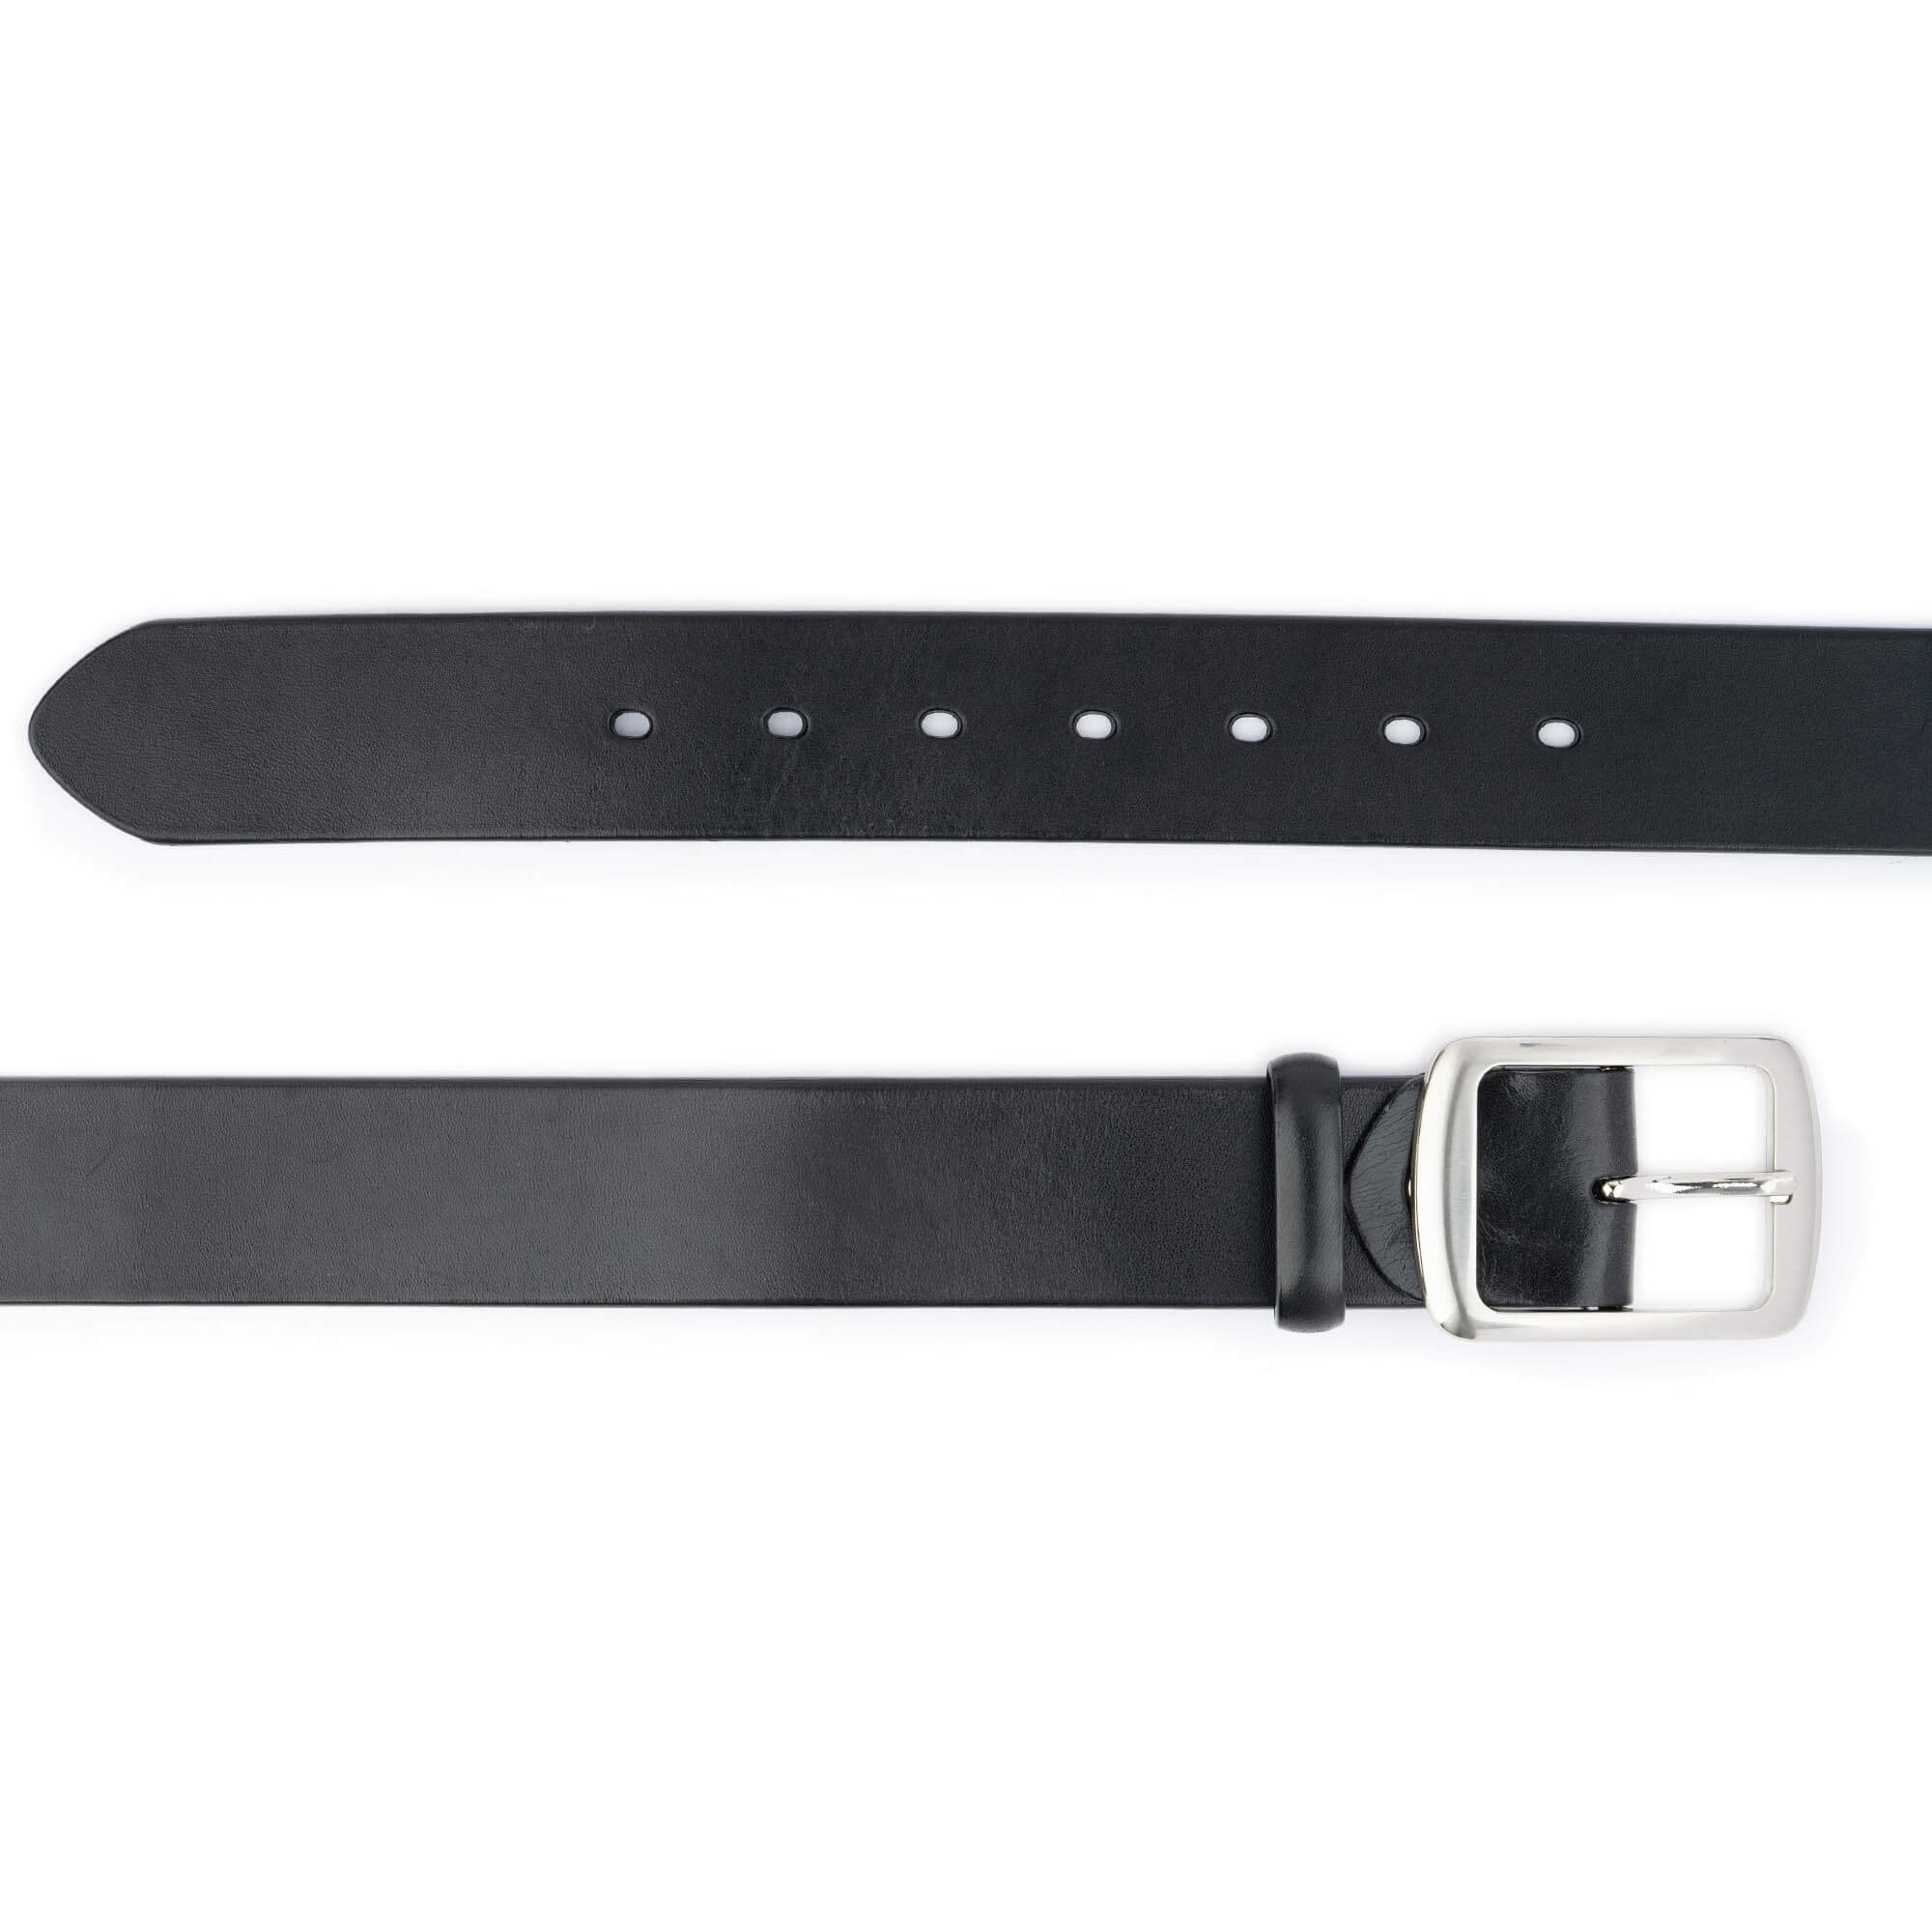 Women's 4cm wide belt handcrafted from soft black leather ideal for dr